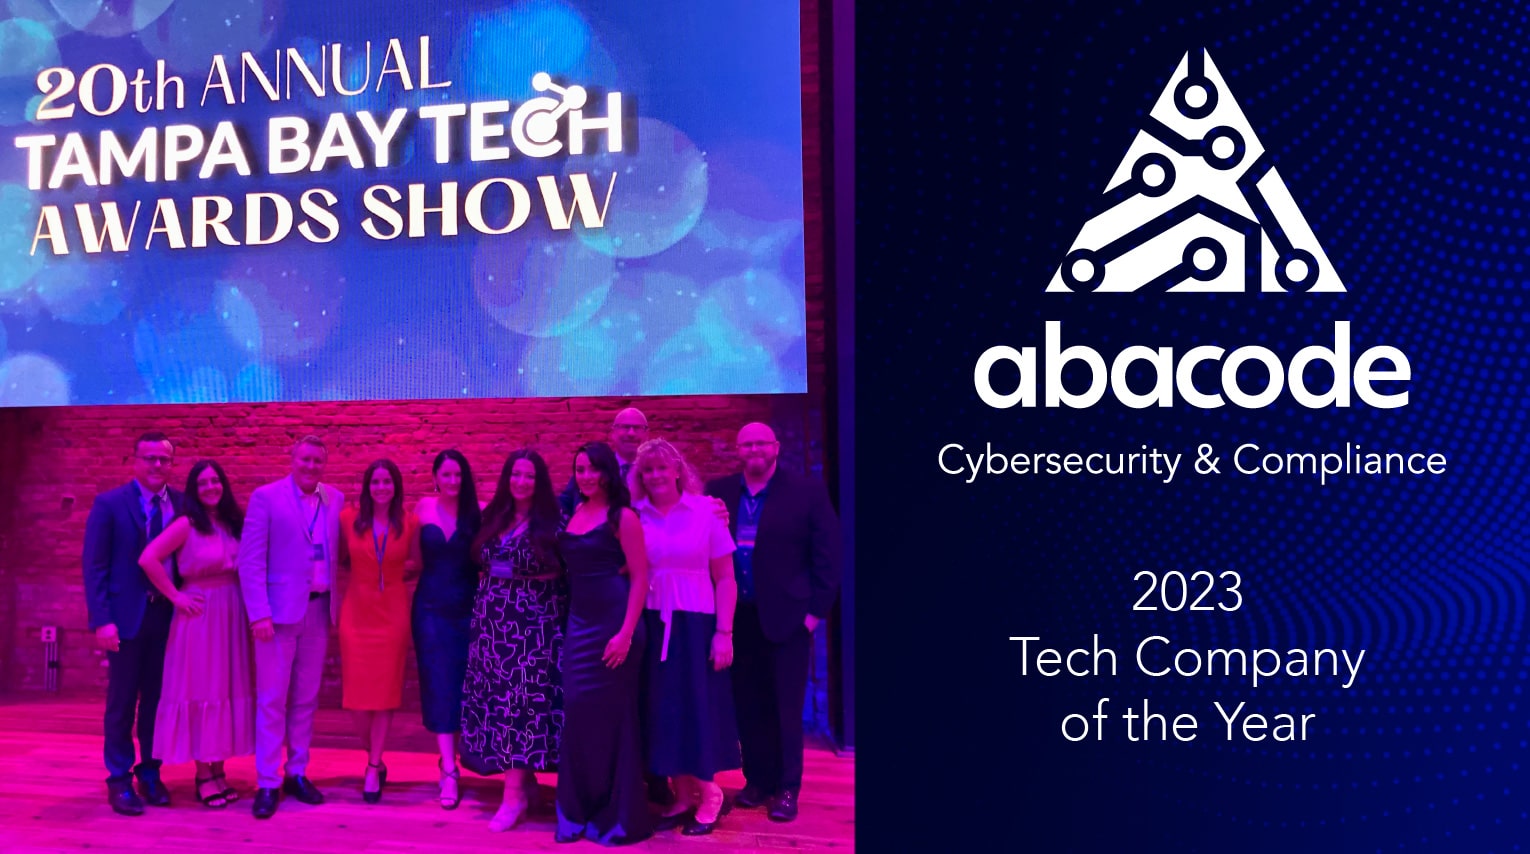 Abacode Cybersecurity & Compliance Named 2023 Tech Company of the Year by Tampa Bay Tech